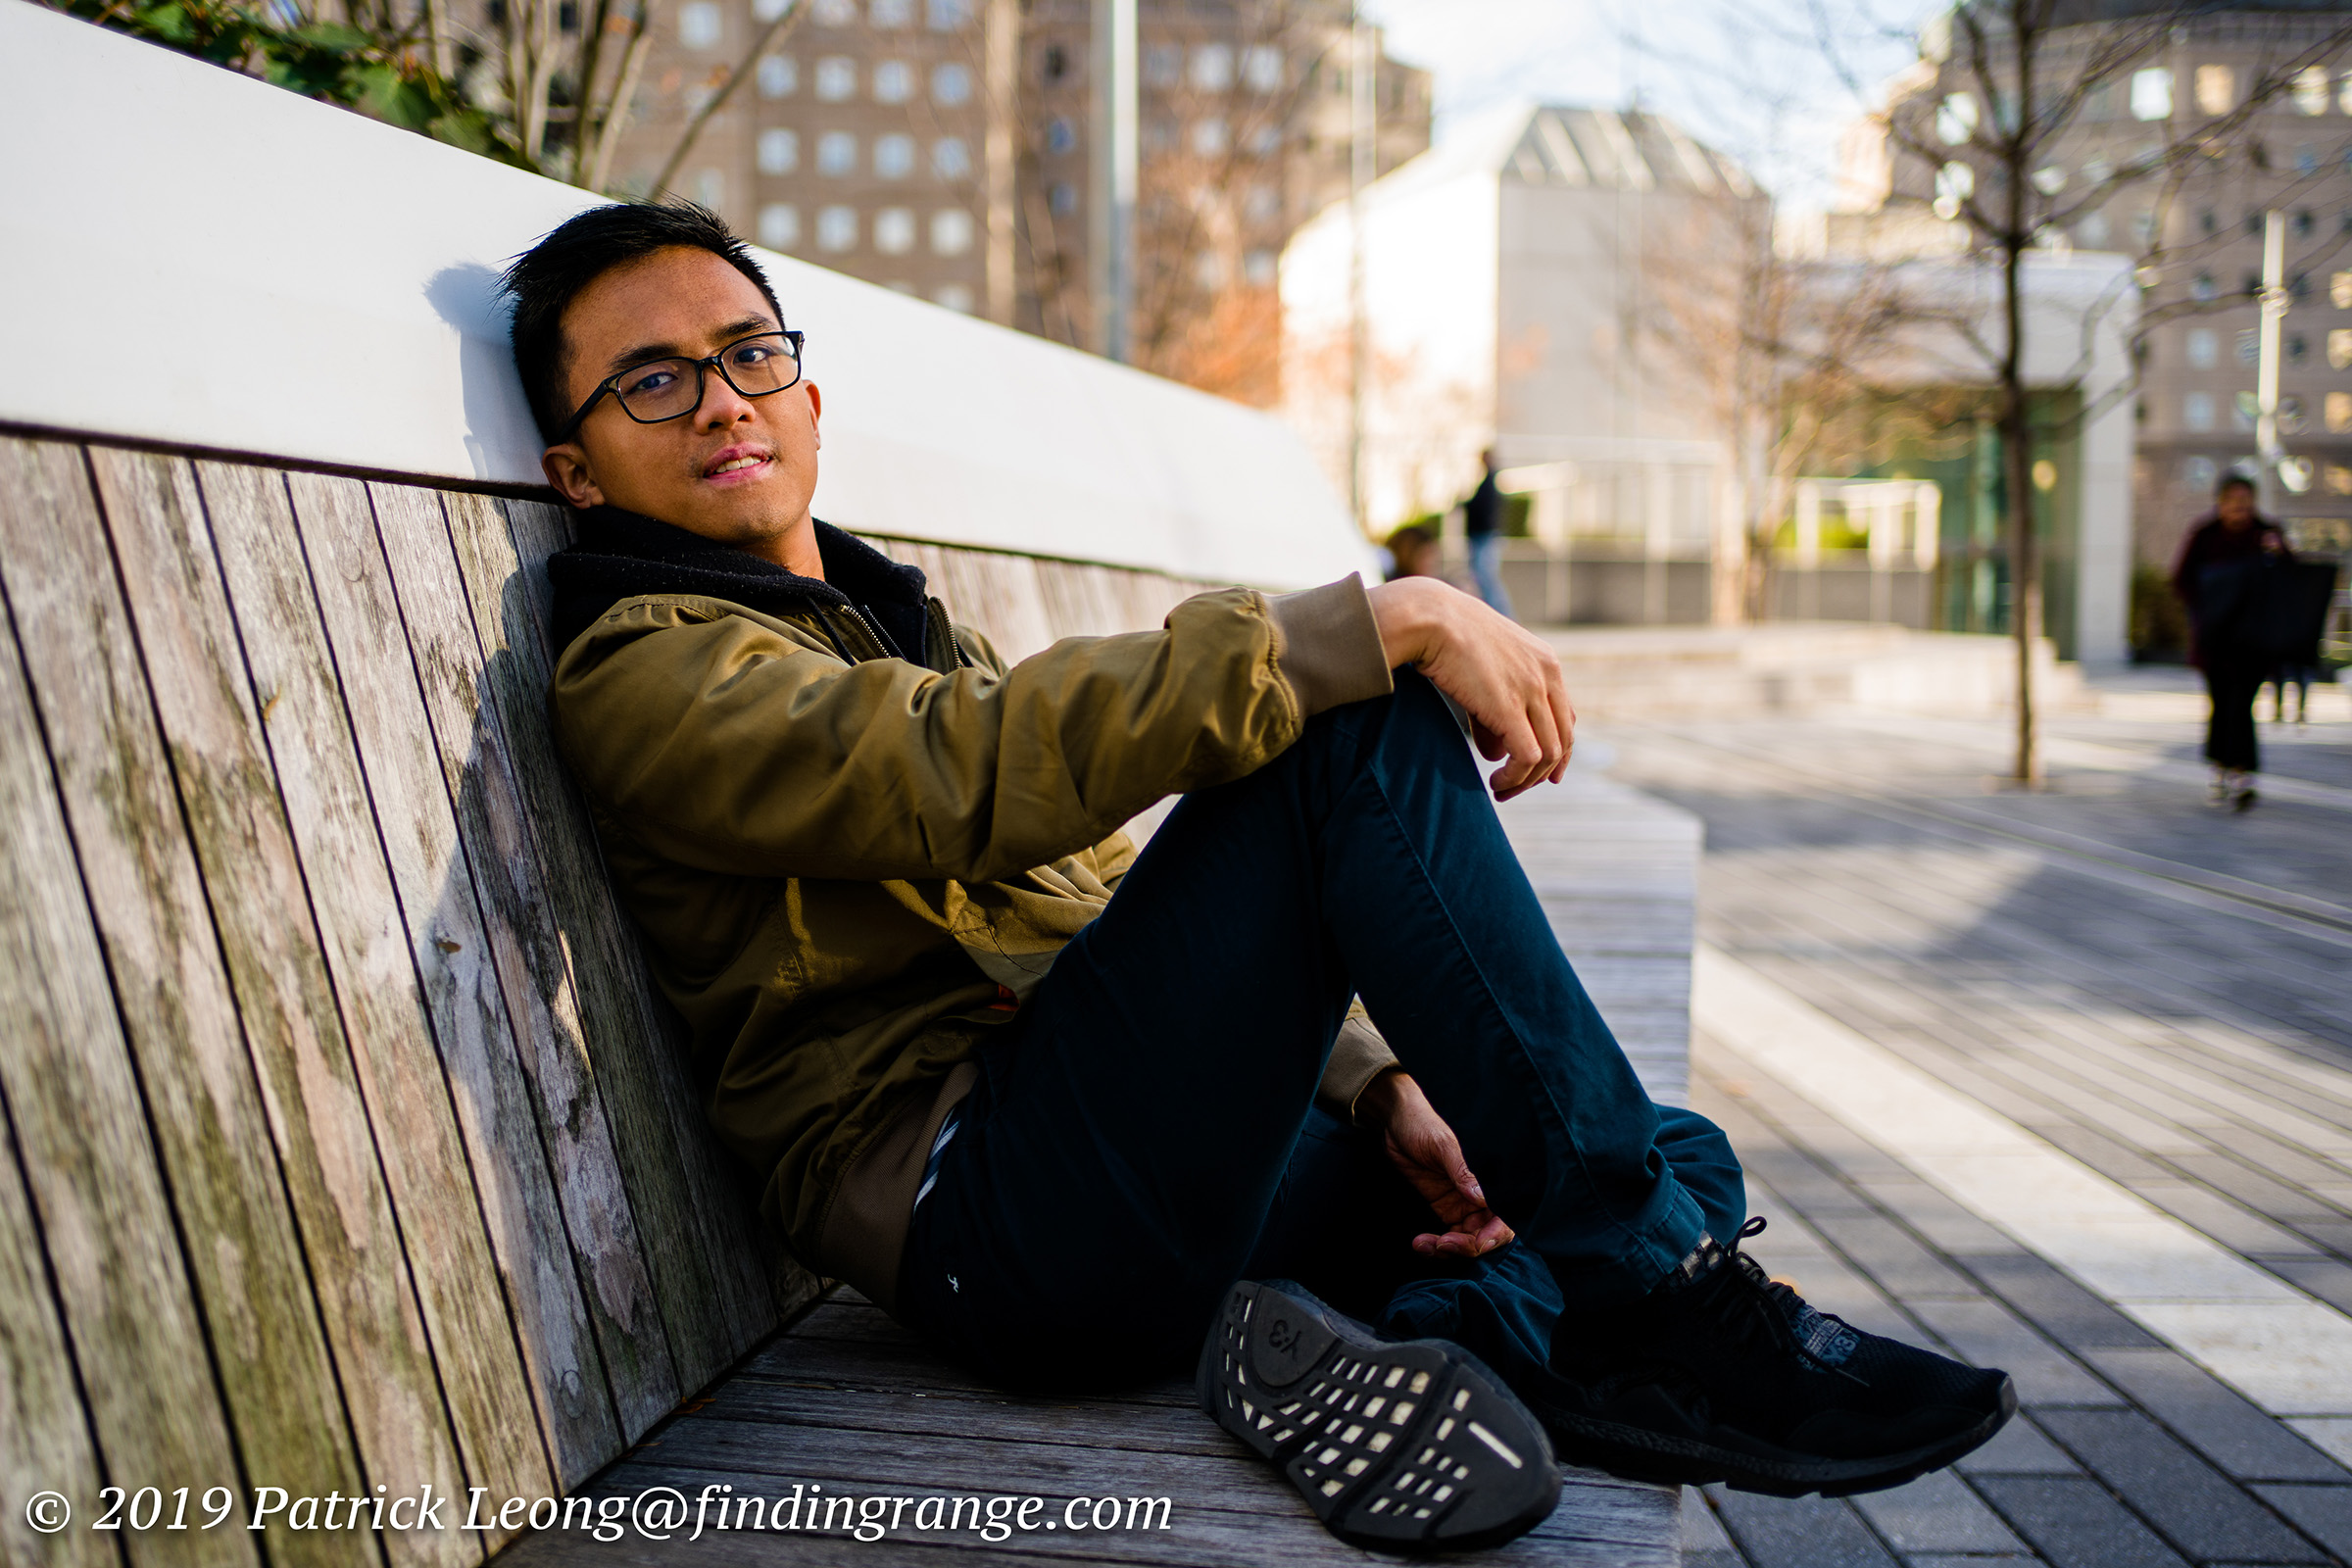 Sony FE 35mm F1.8 Review: Digital Photography Review